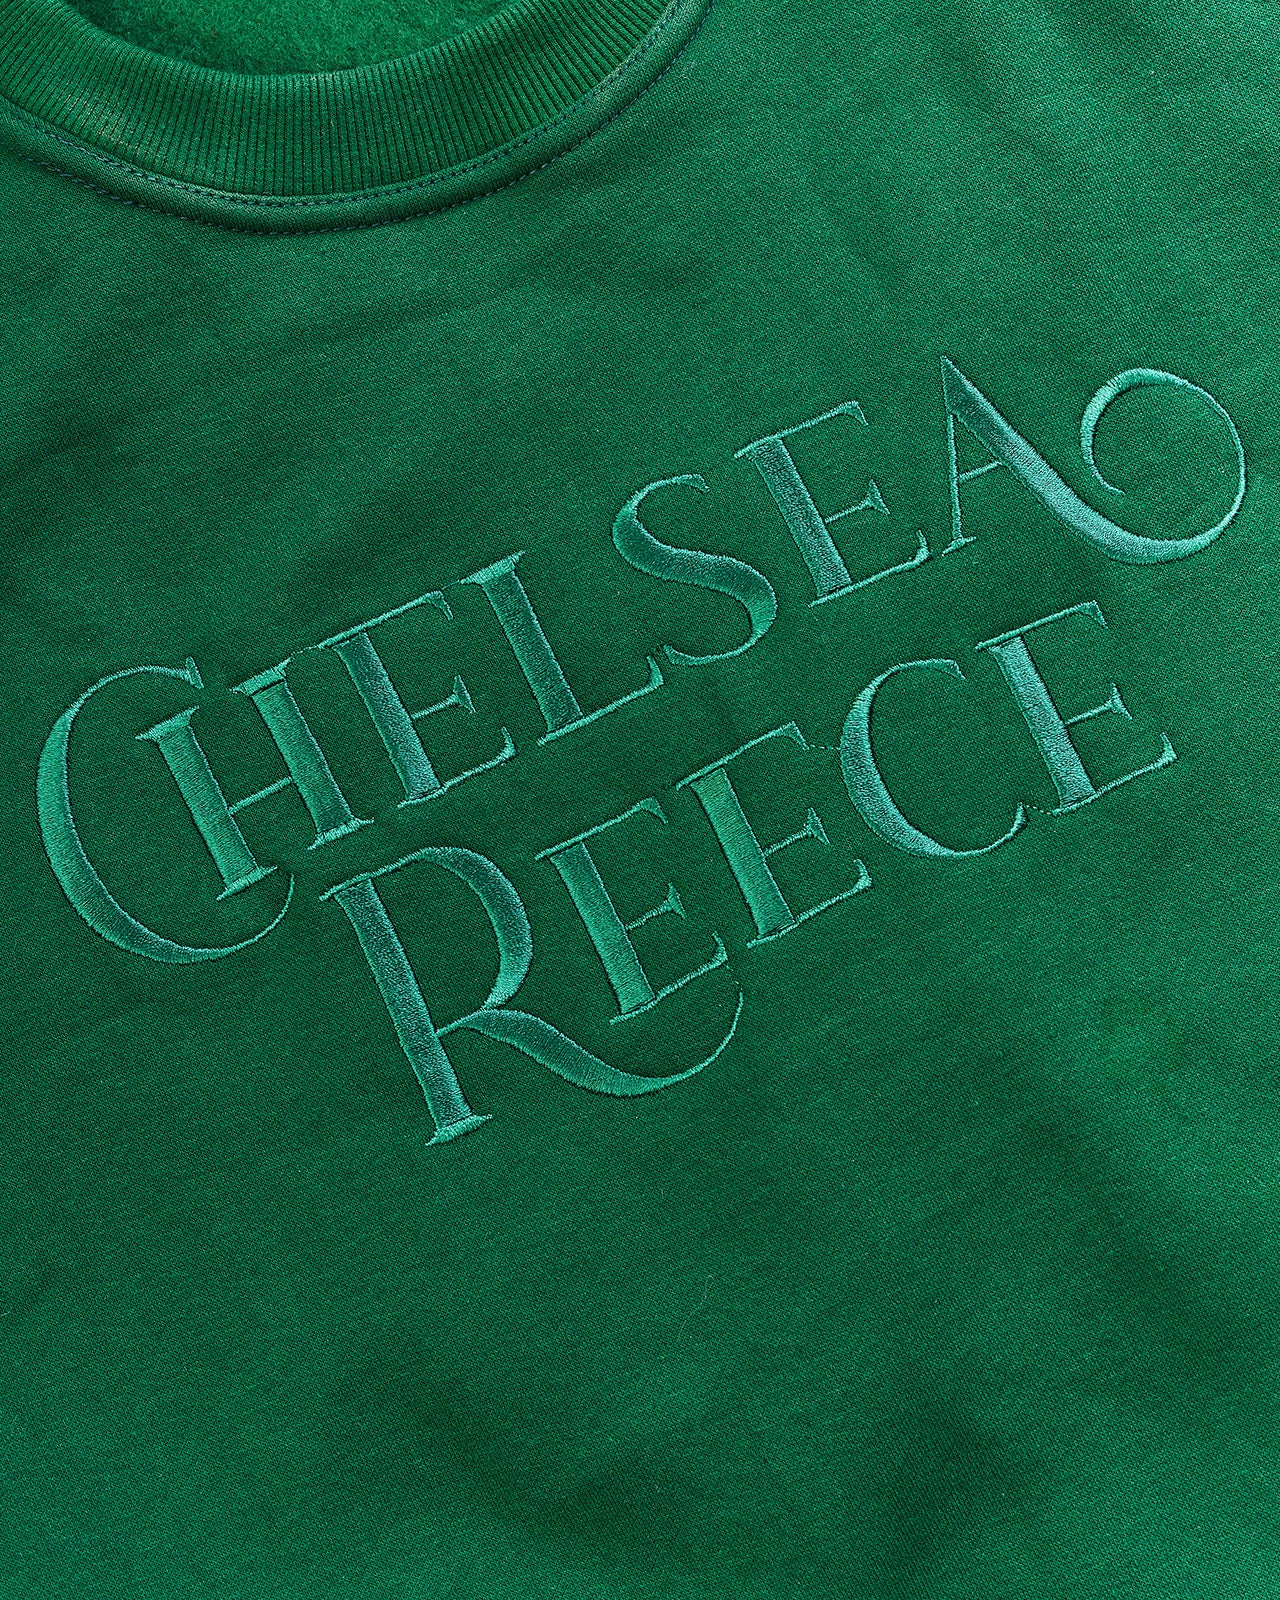 FINAL SALE The Join the Crew-neck in Chelsea Green - IN STOCK NOW